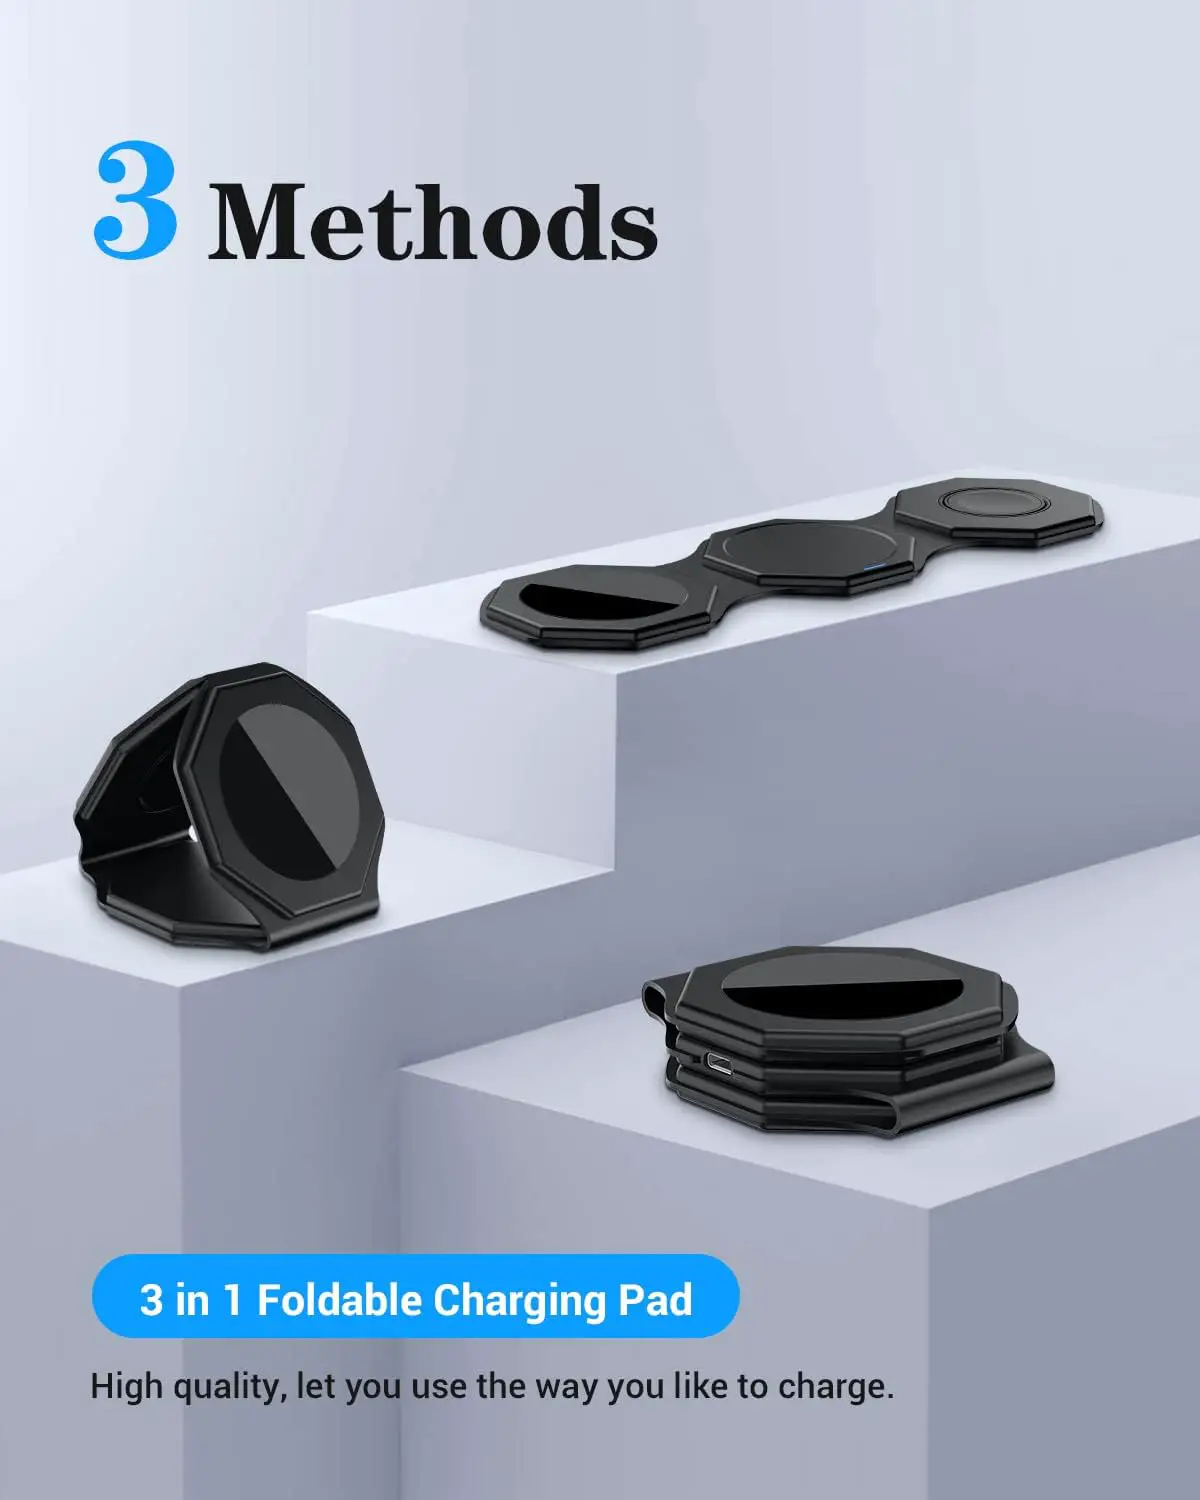 Wireless Charger 3 in 1, Magnetic Foldable Wireless Charging Station for iPhone 14/13/12/11 Pro Max/X/Xs Max/8/8 Plus, AirPods 3/2/pro, iWatch Series 7/6/5/SE/4/3/2 (Adapter Included)